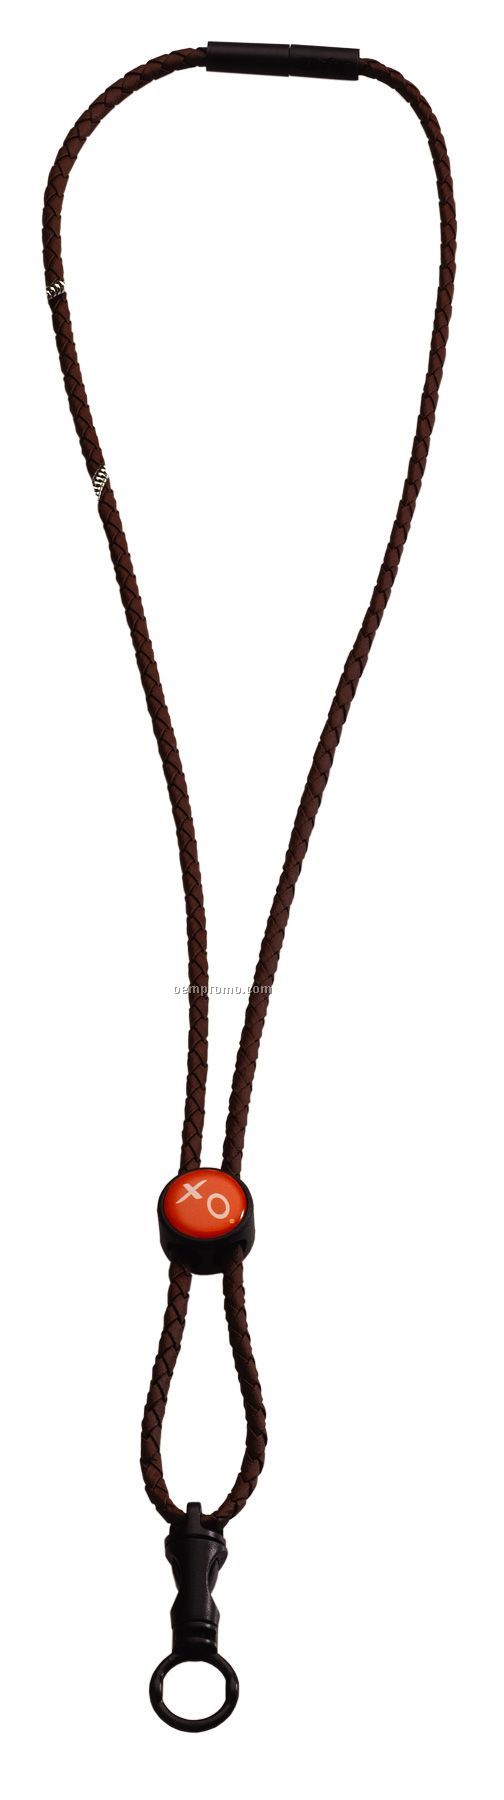 3/16" Braided Leather-like Cord Lanyard With Round Slider